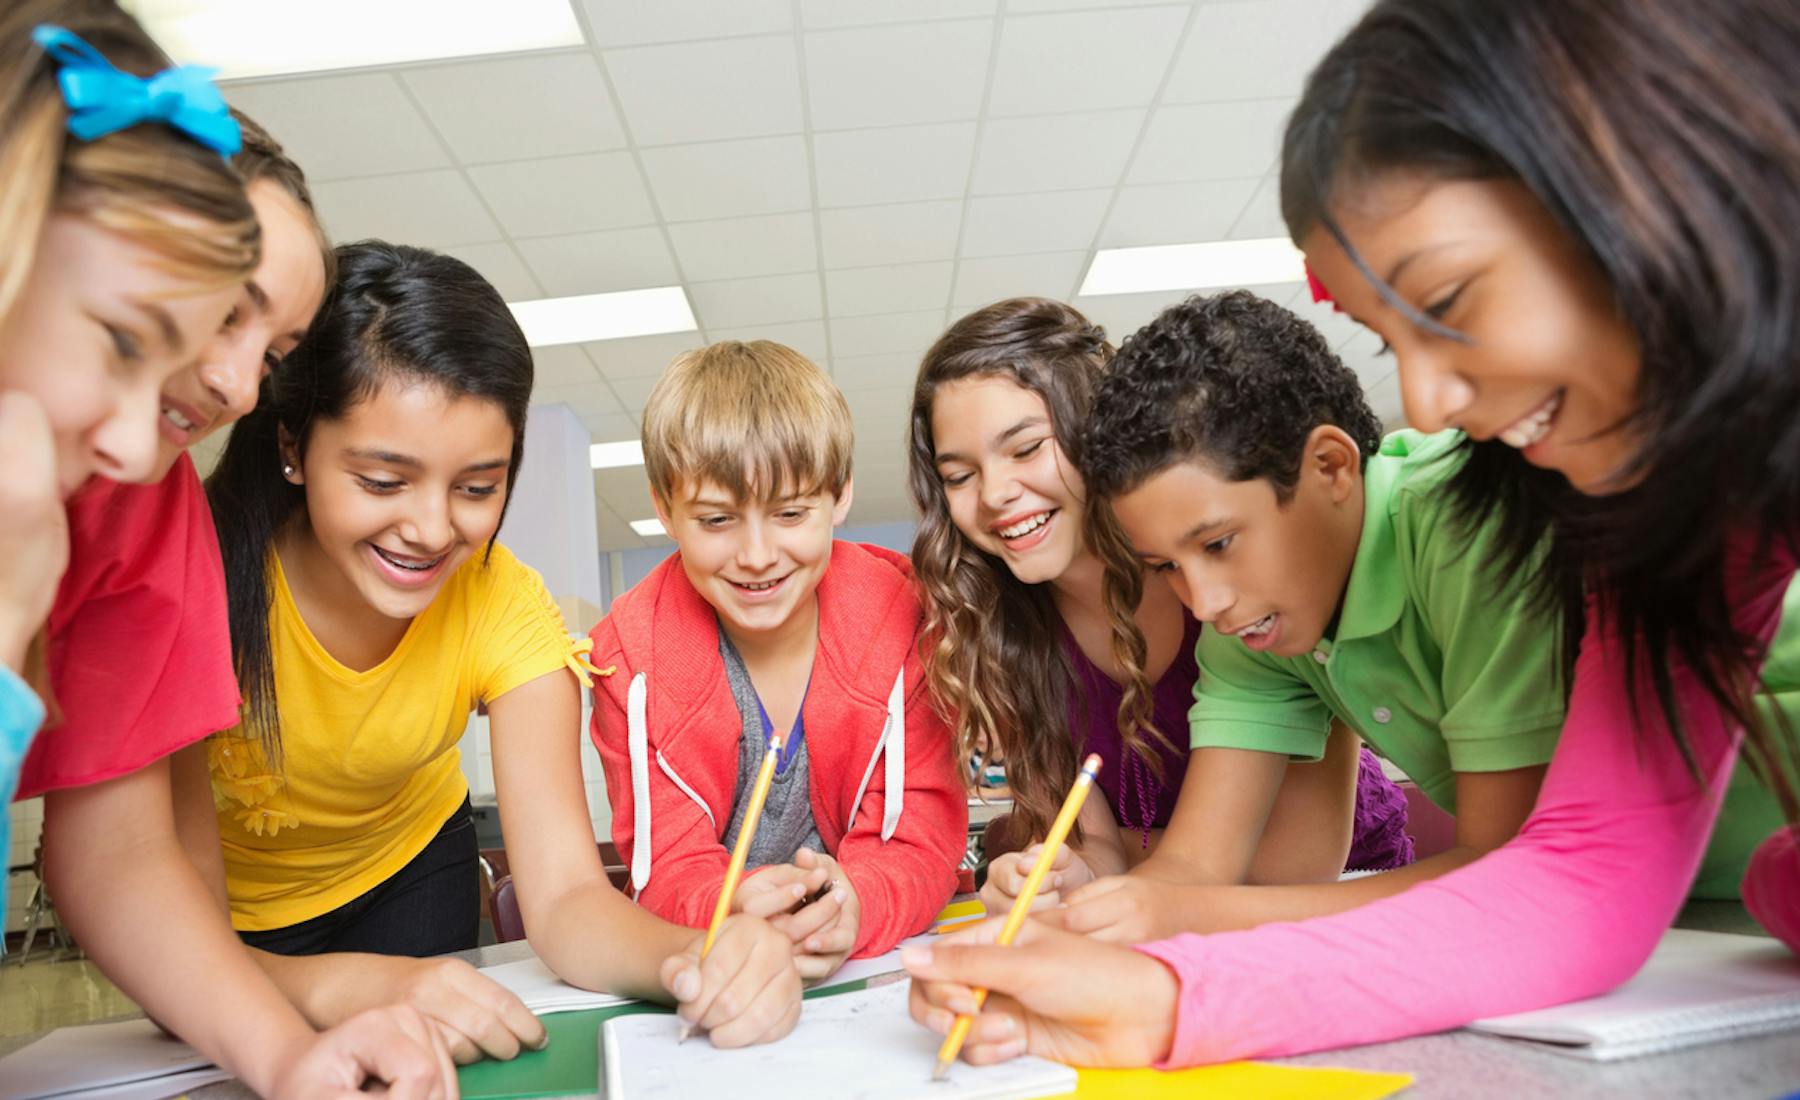 Seven middle school students gather around a table smiling while doing a writing exercise.